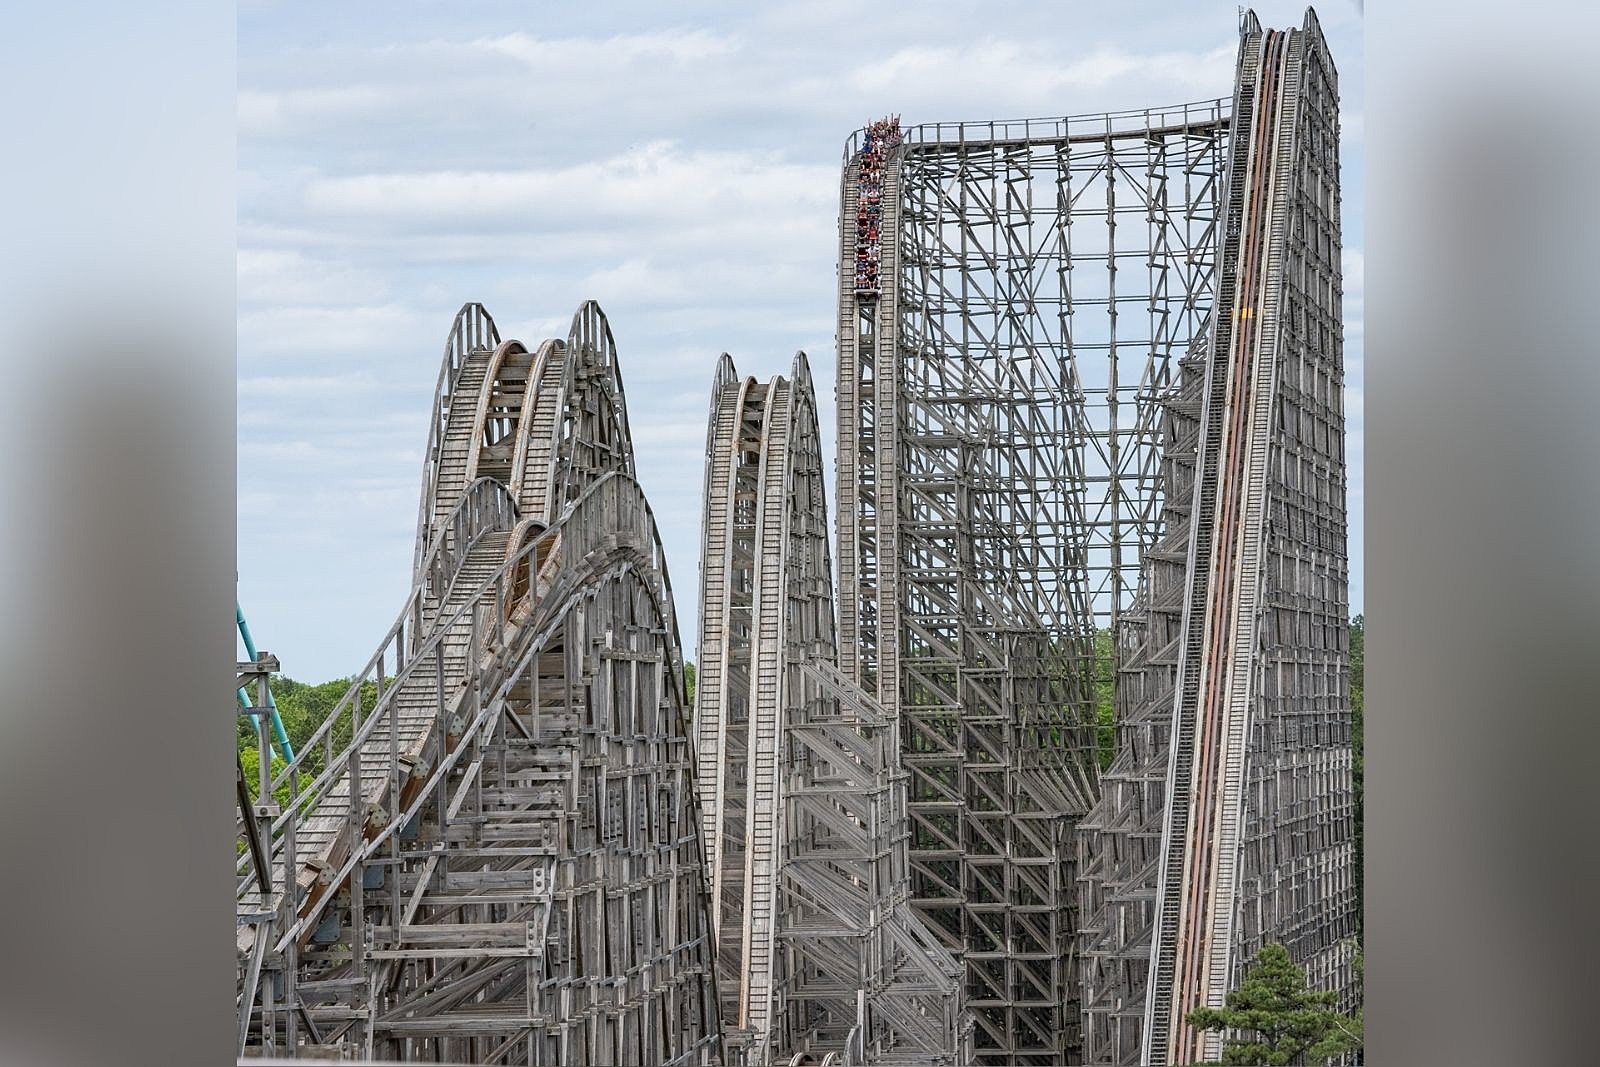 El Toro Roller Coaster at Six Flags in Jackson NJ Back for 2022?